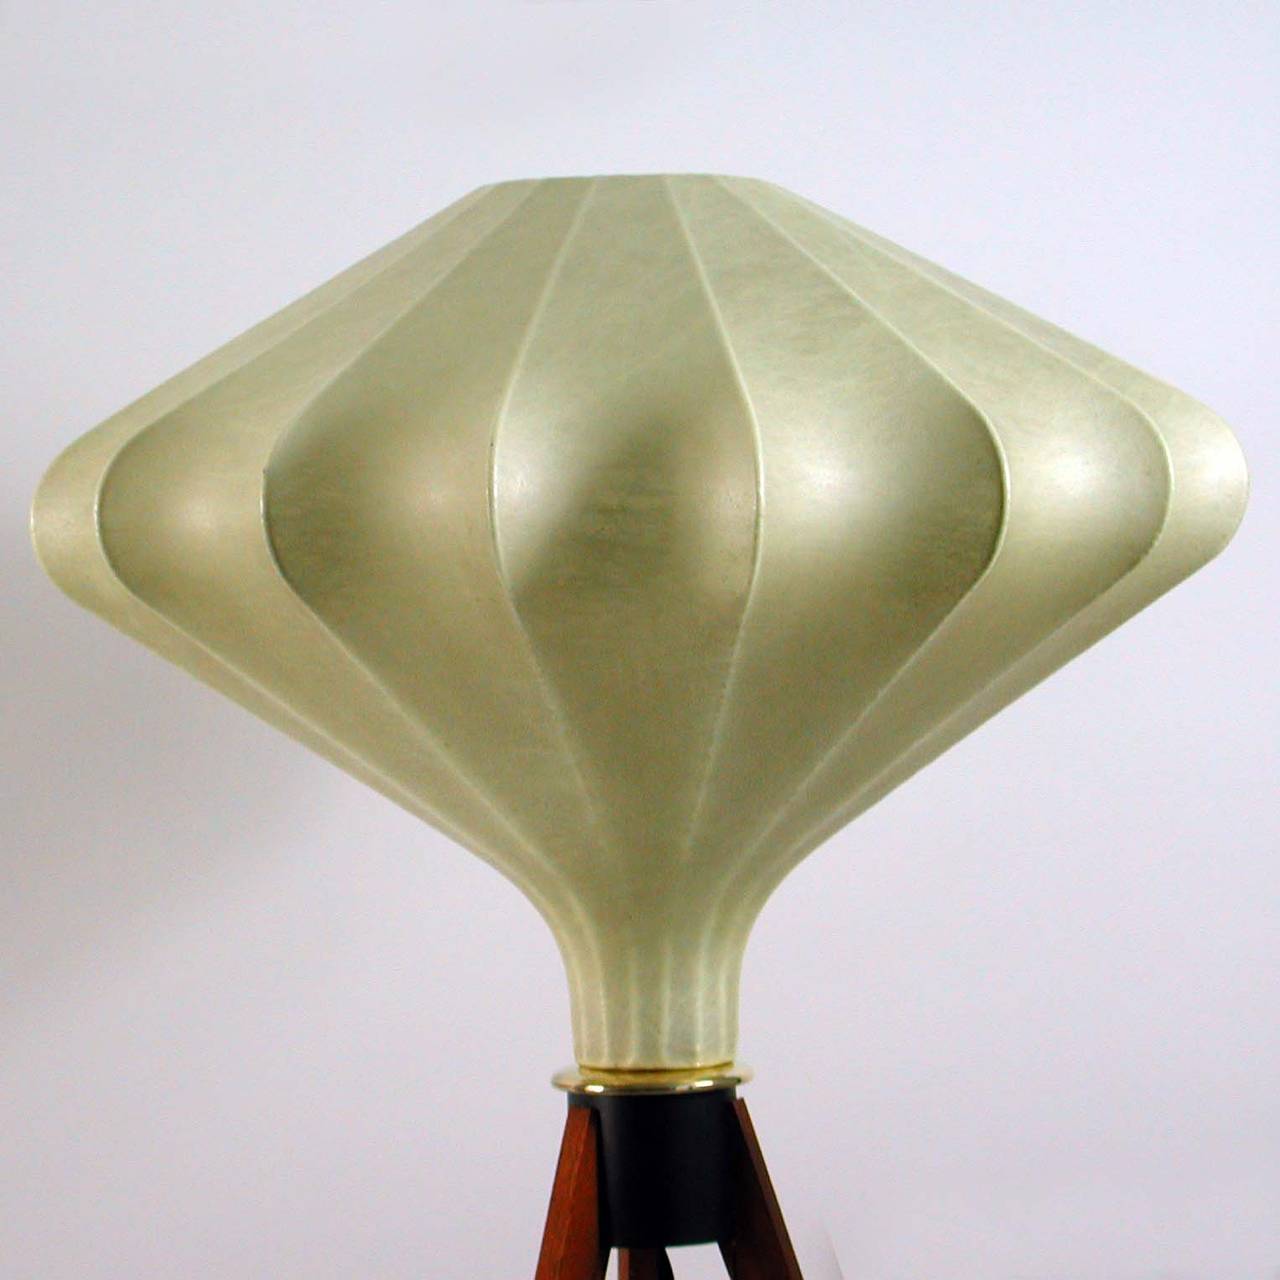 Beautiful Danish modern floor lamp on teak tripod foot with fiber glass cocoon diamond shaped lamp shade in the Style of Acille Castiglioni.

Excellent condition. Rewired with new fabric wiring.